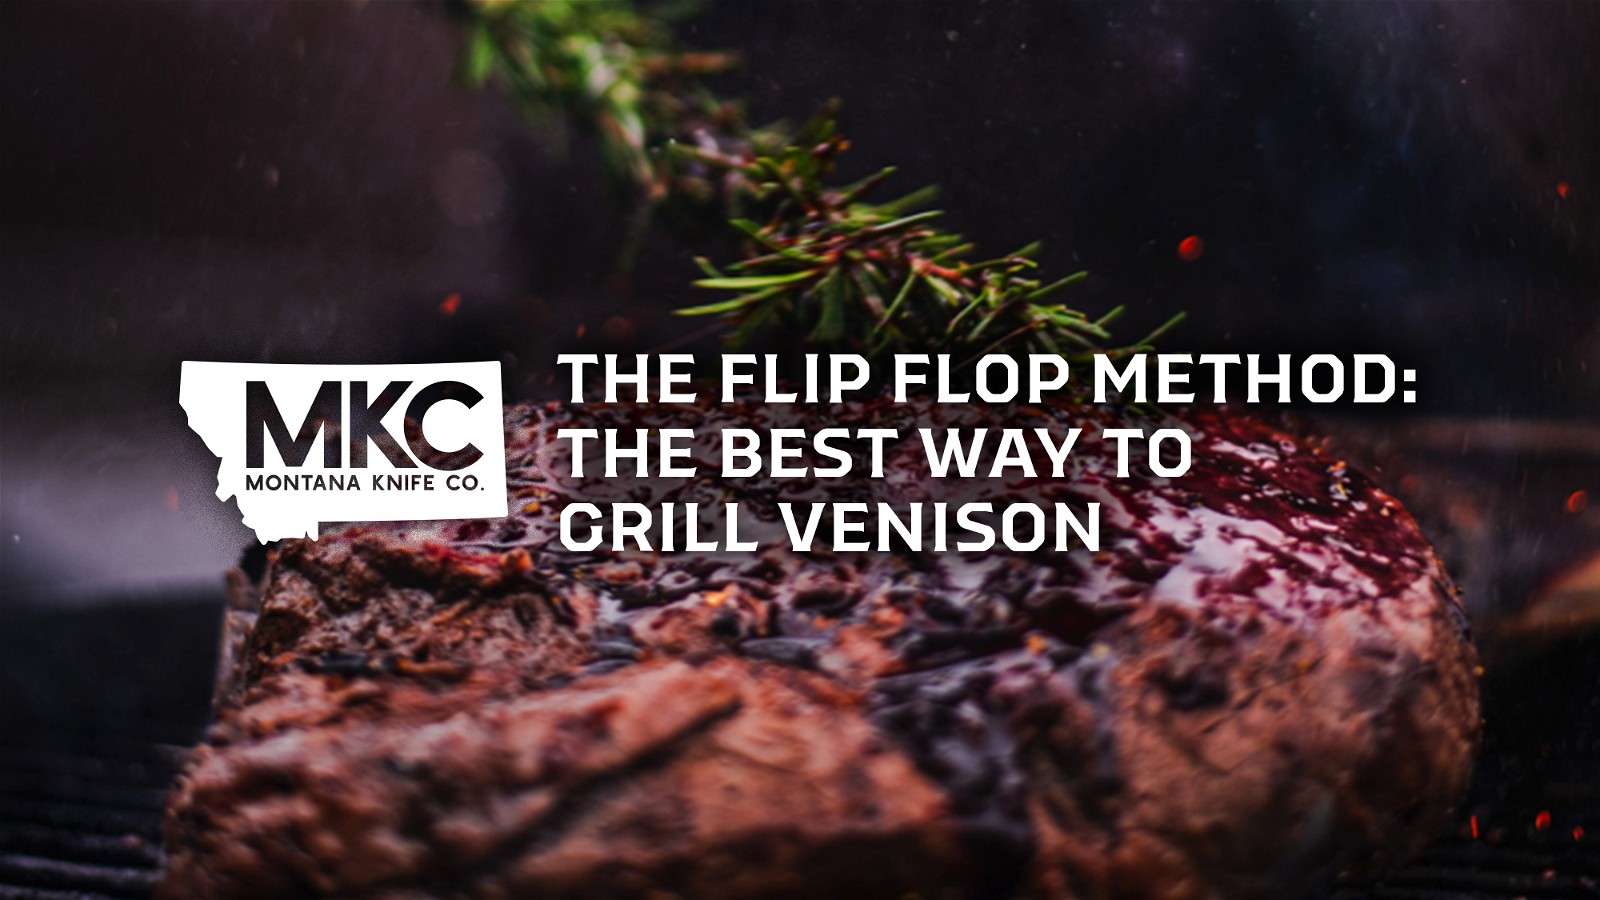 Image of The Flip Flop Method: The Best Way to Grill Venison